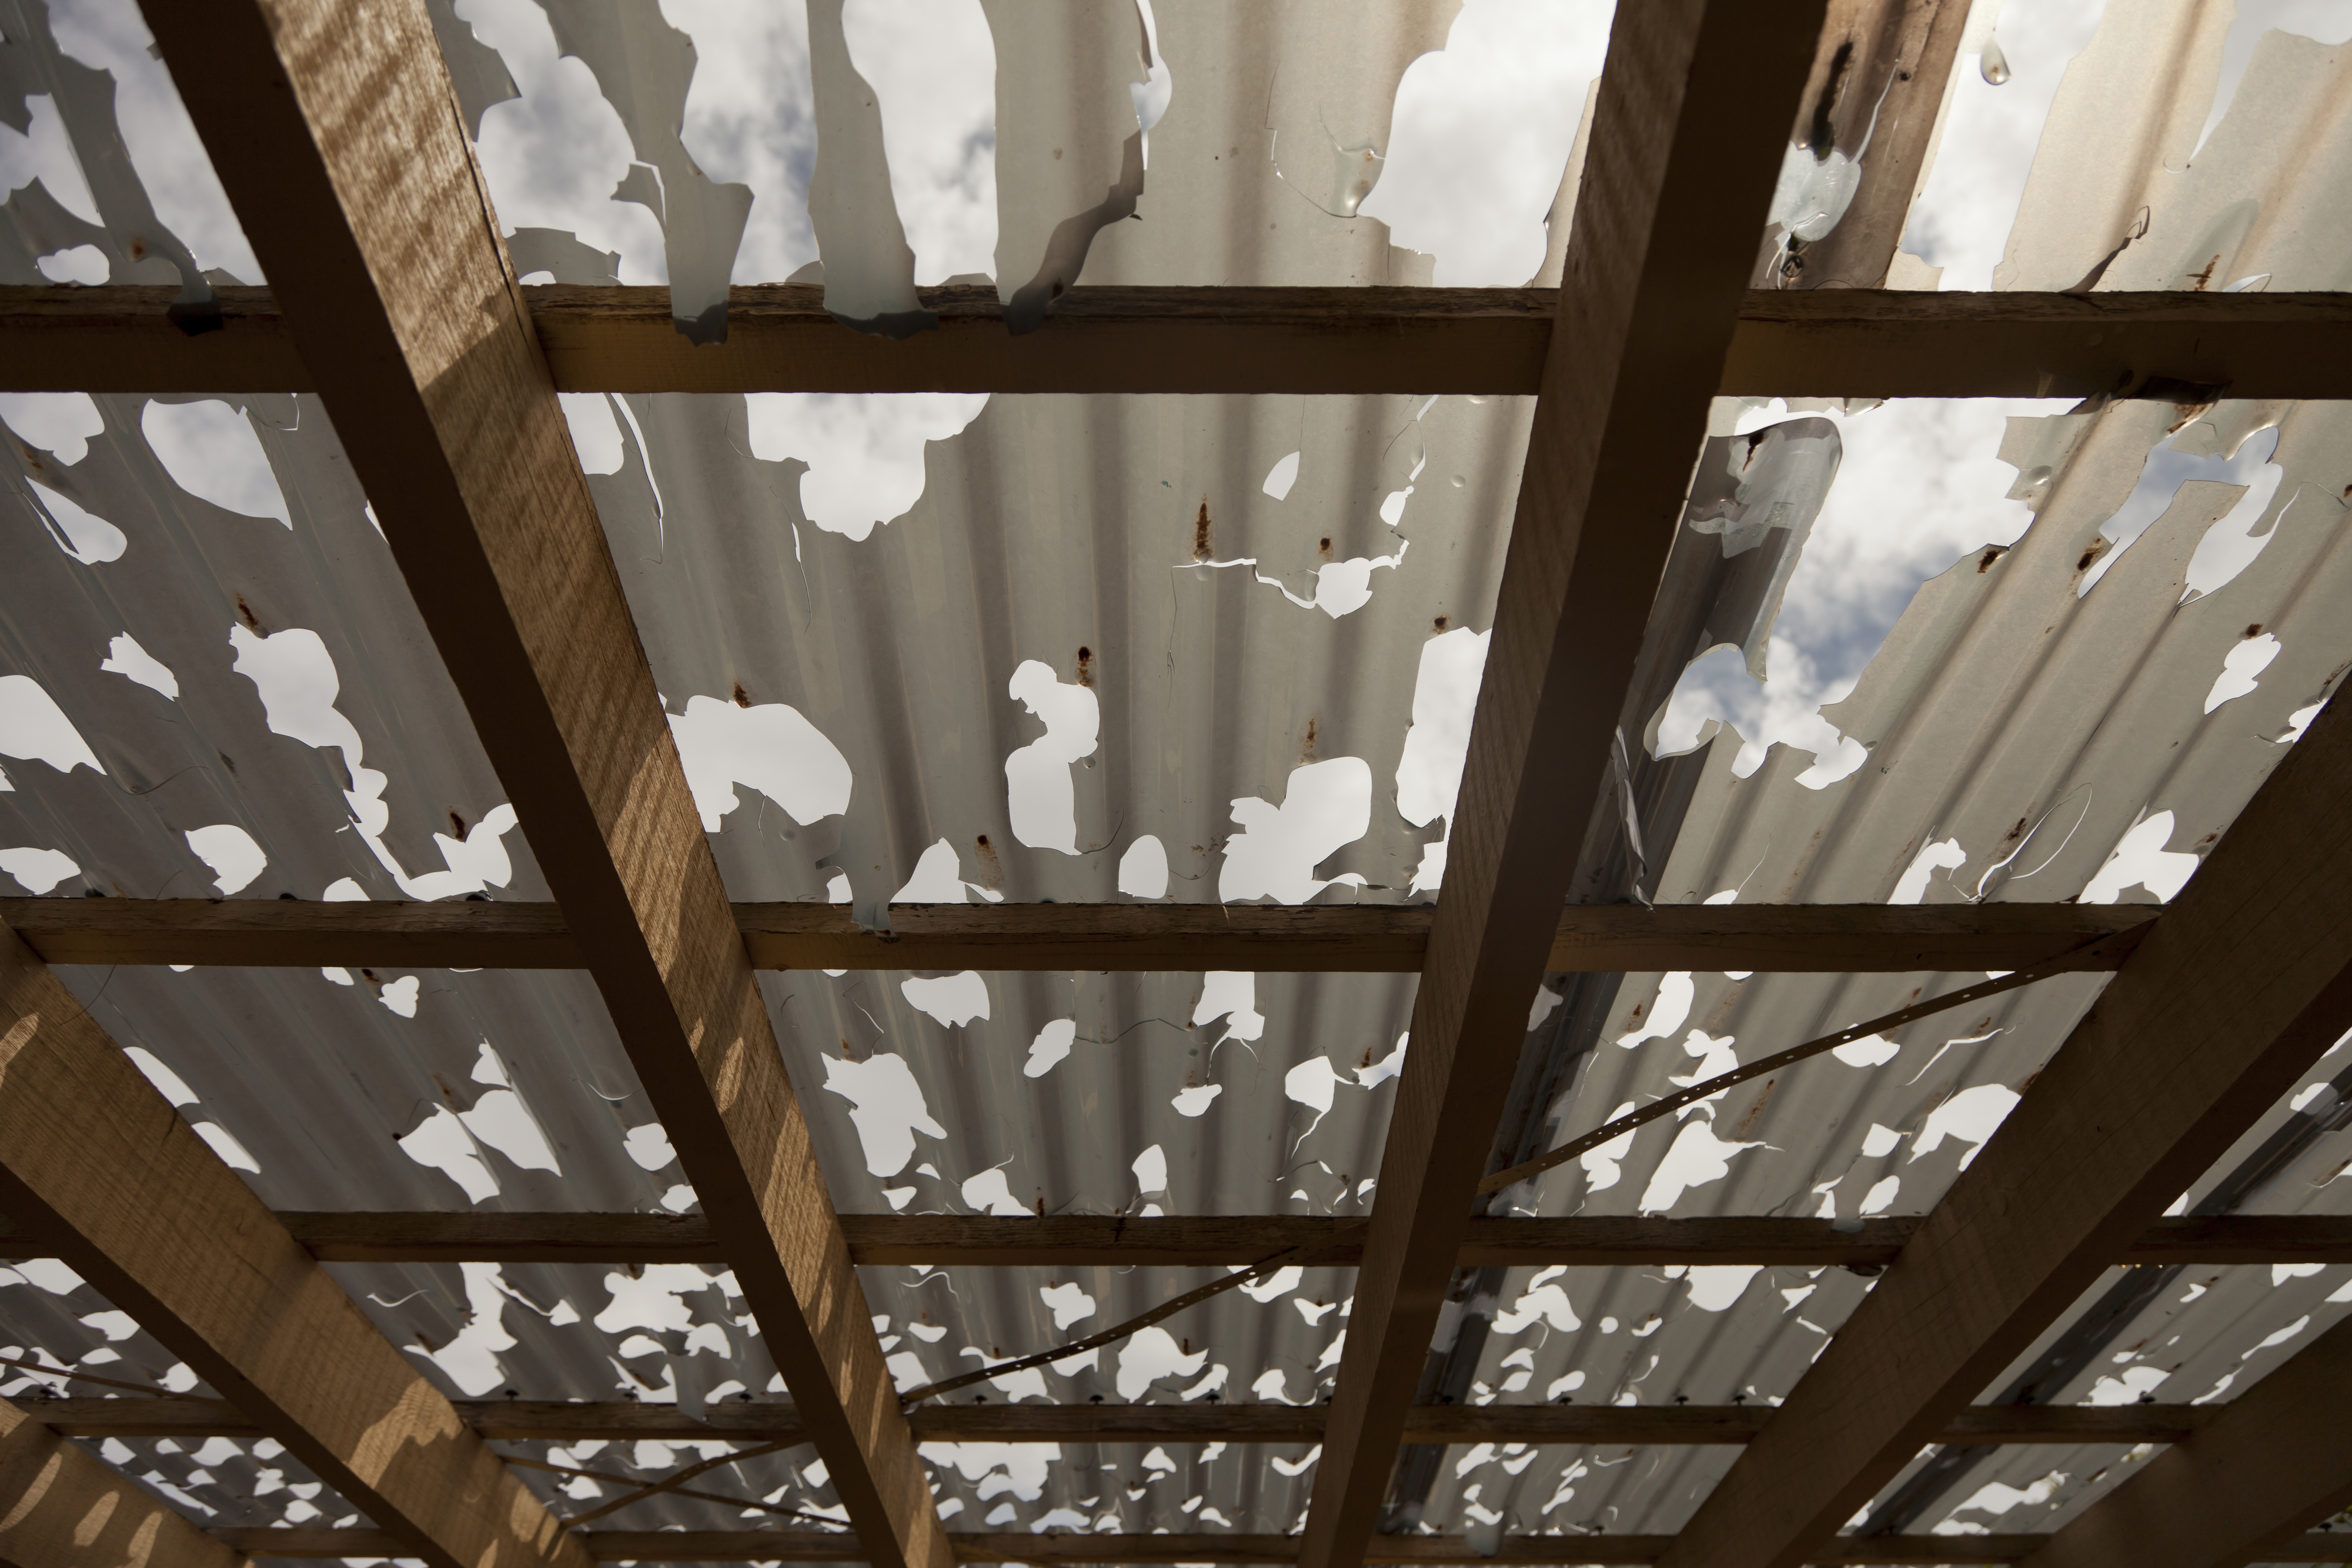 Damaged tin roof with holes, viewed from below, showing wooden beams against the sky